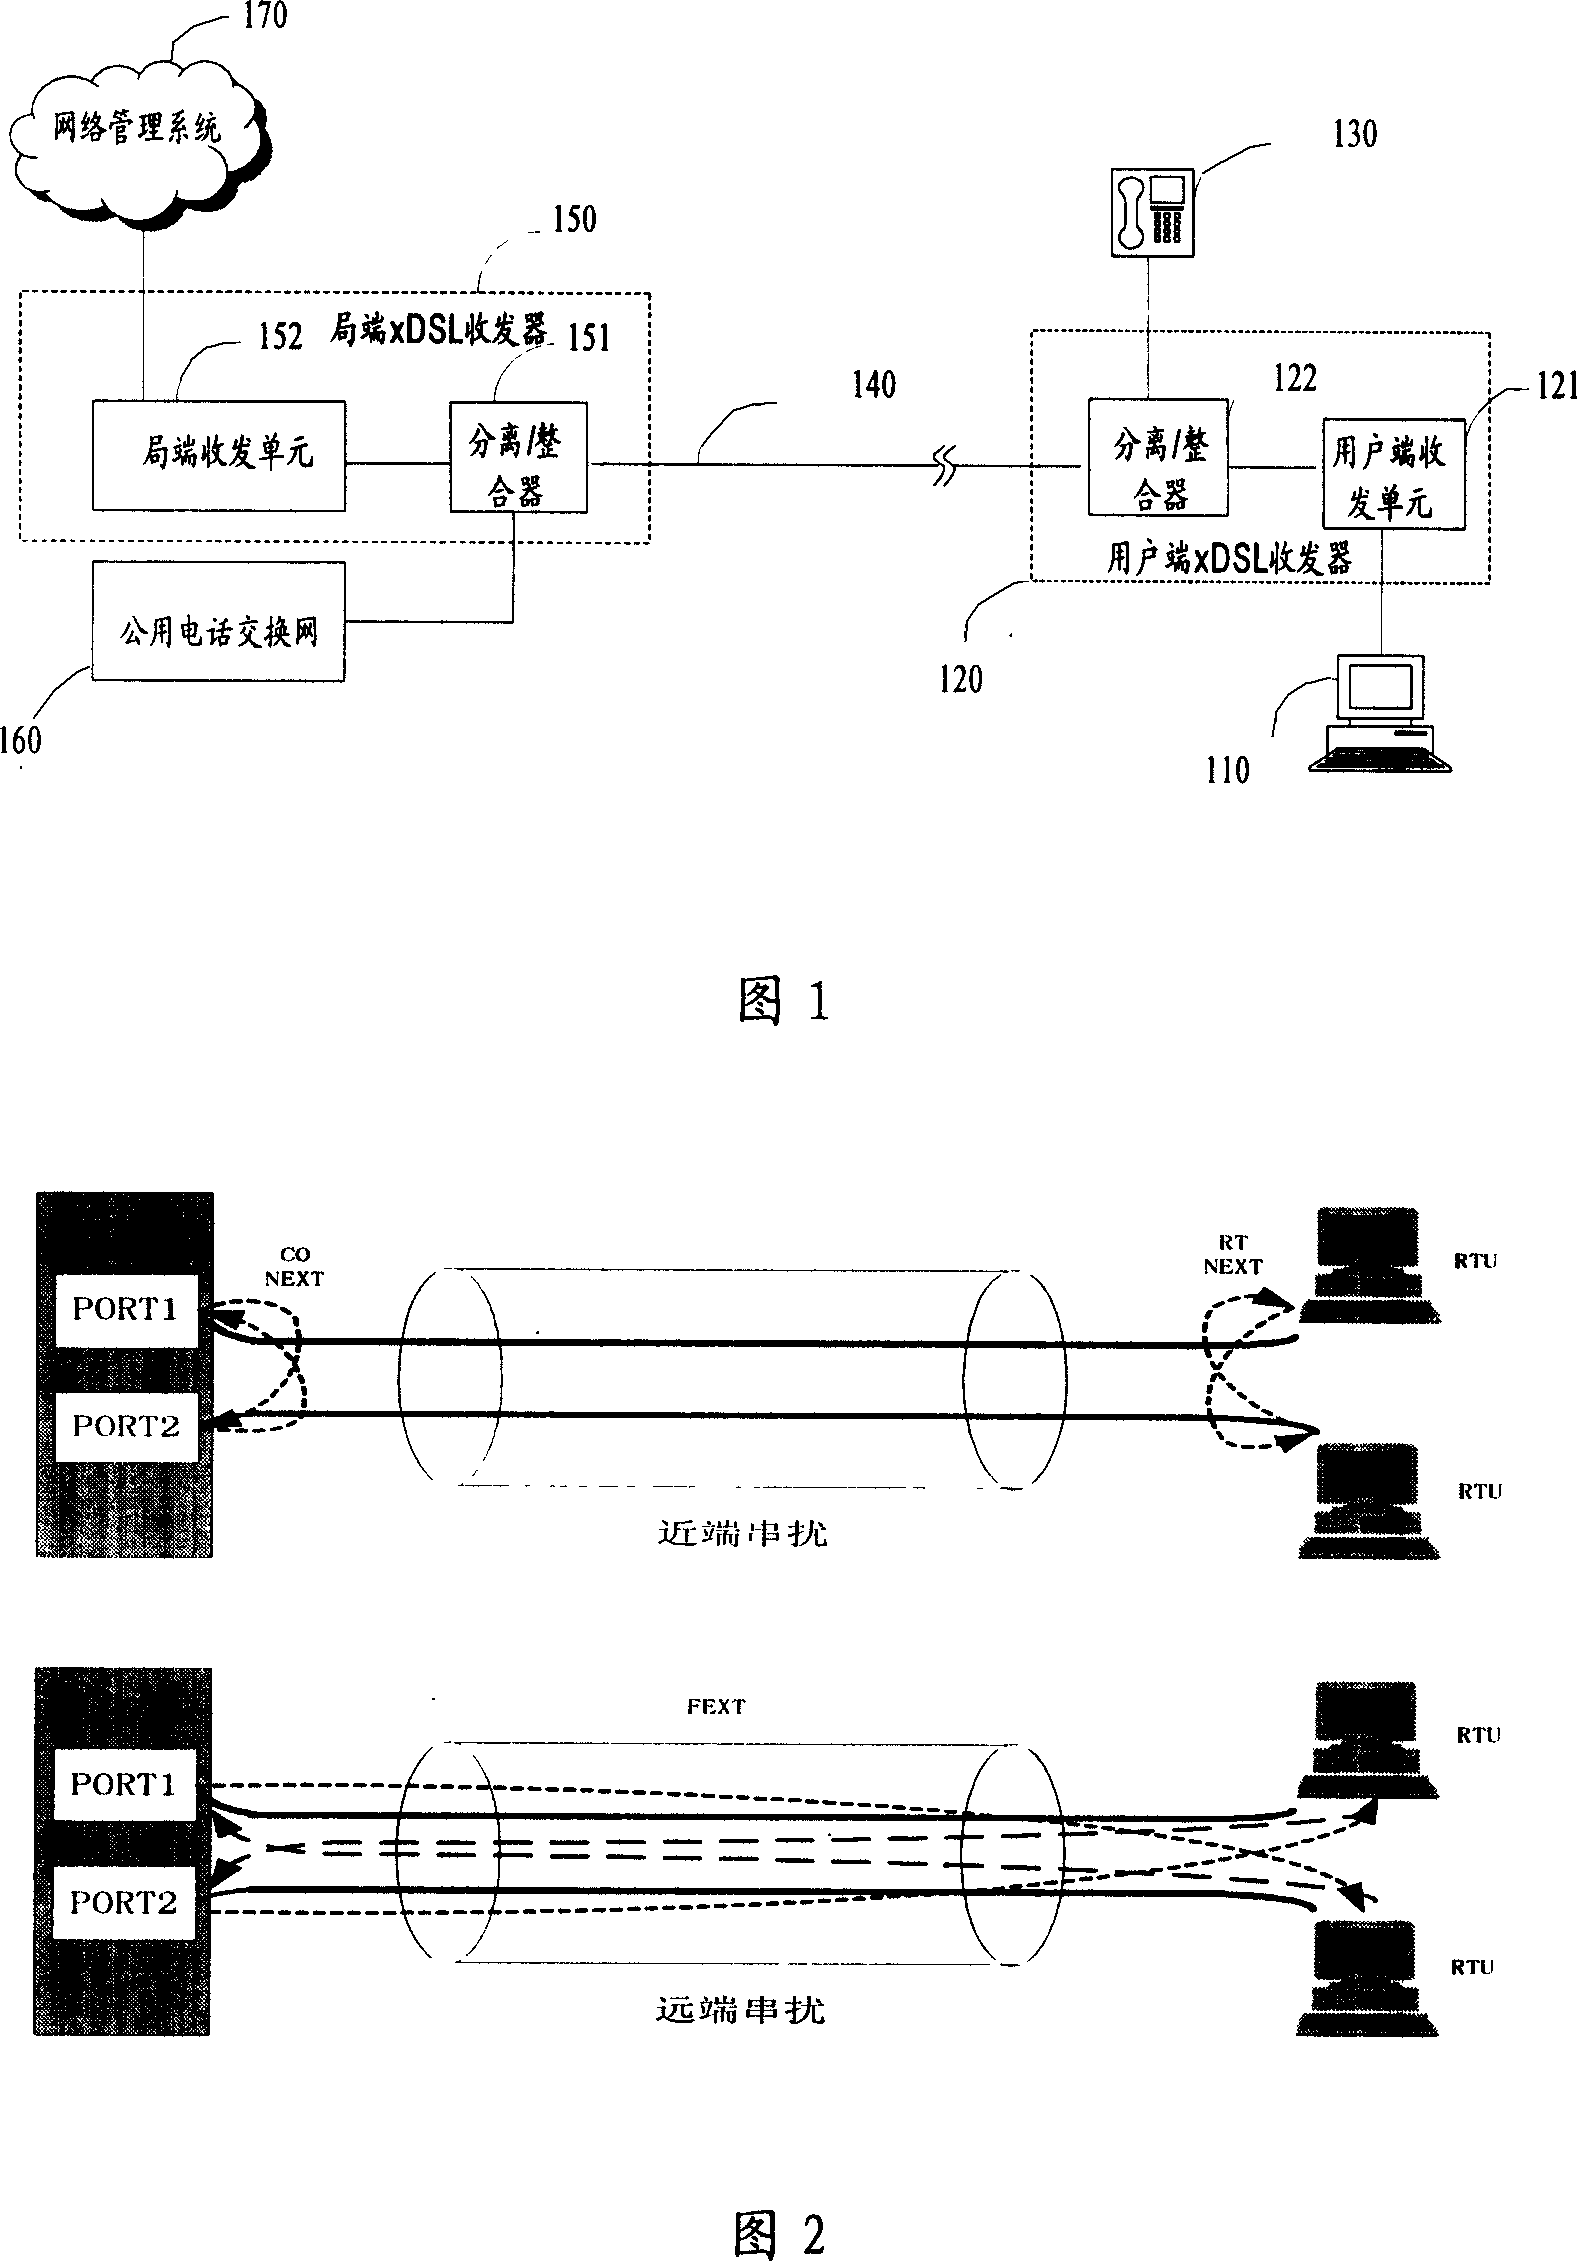 Method for controlling wire communication quality